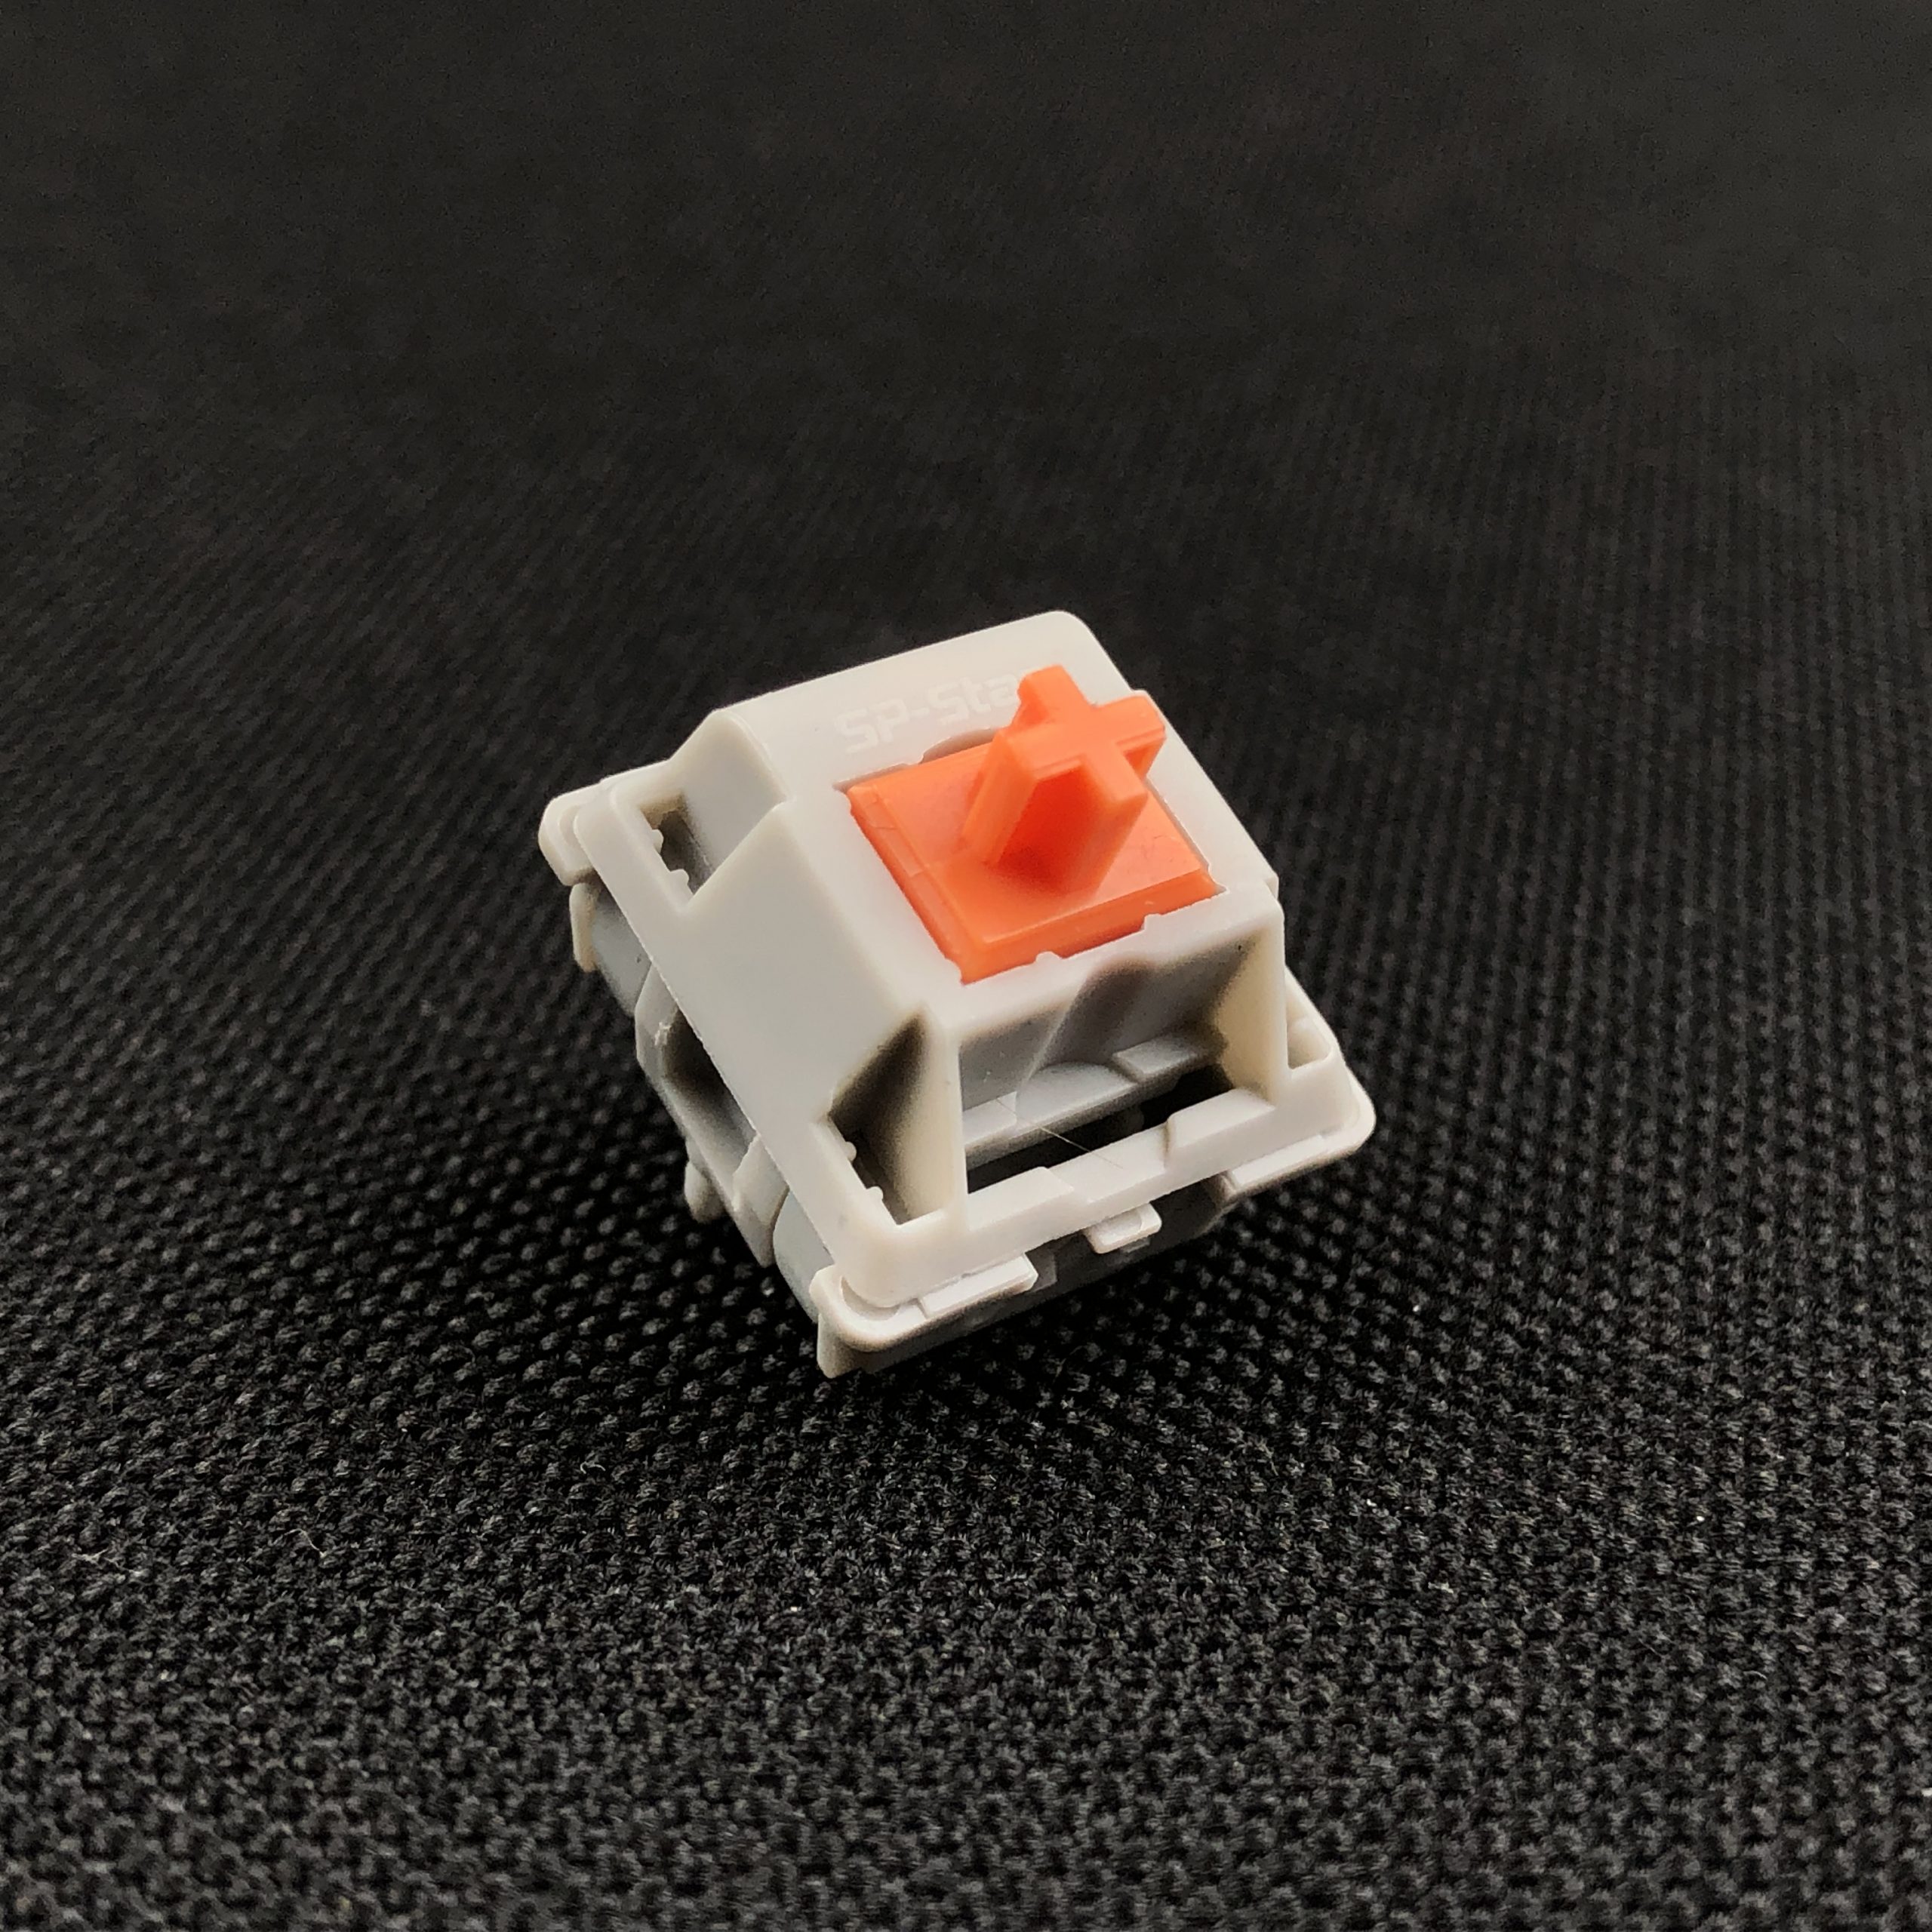 SP Star Meteor Orange switch with gray housing